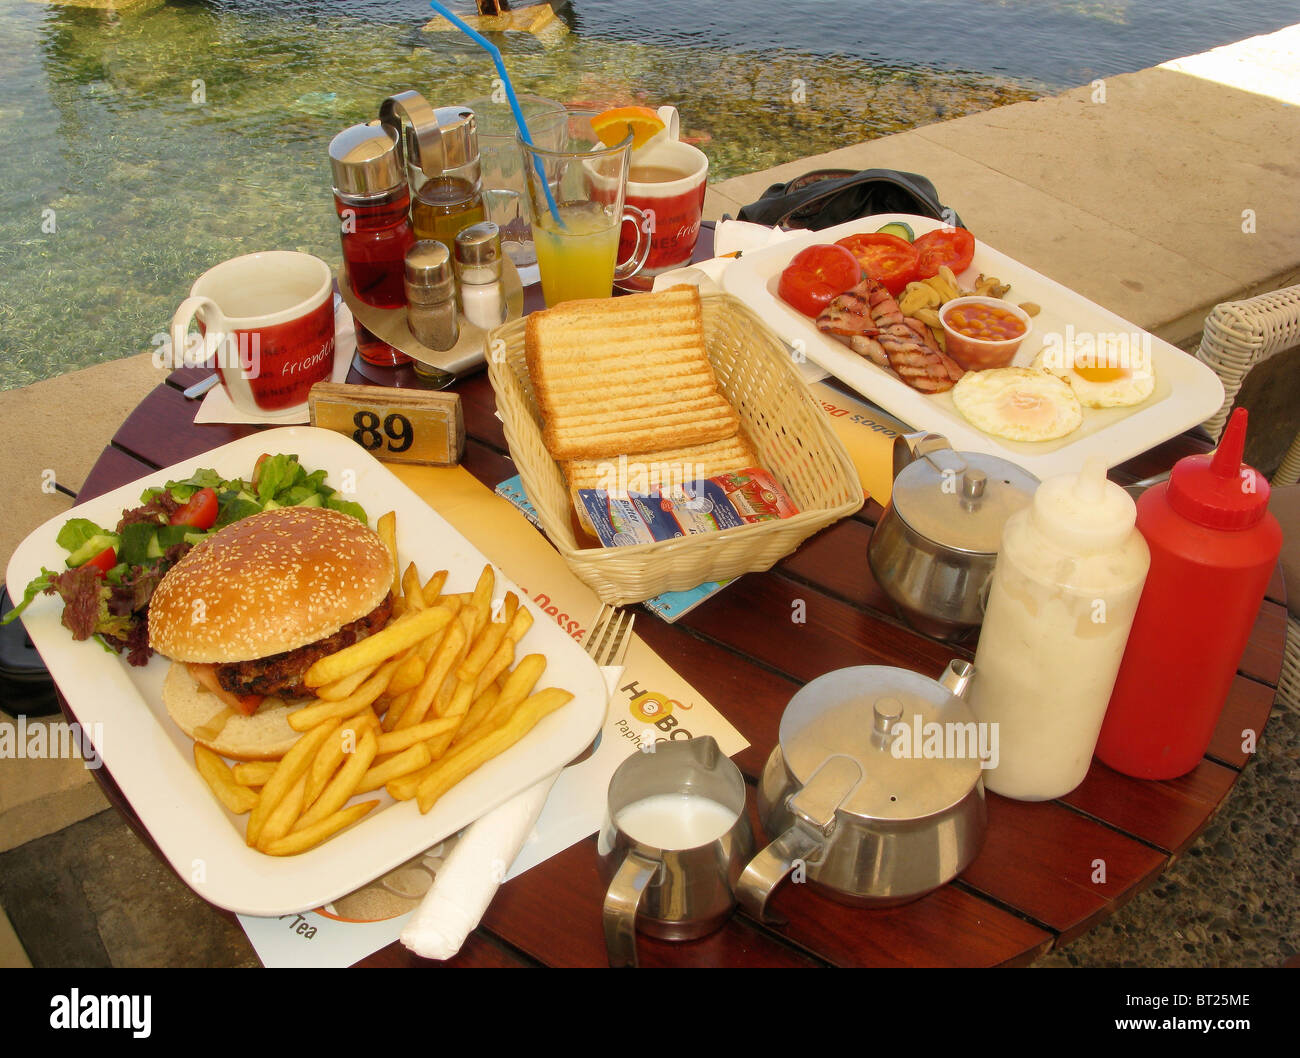 Lunch Table Burger and Chips Al Fresco Mediterranean Resort Stock Photo